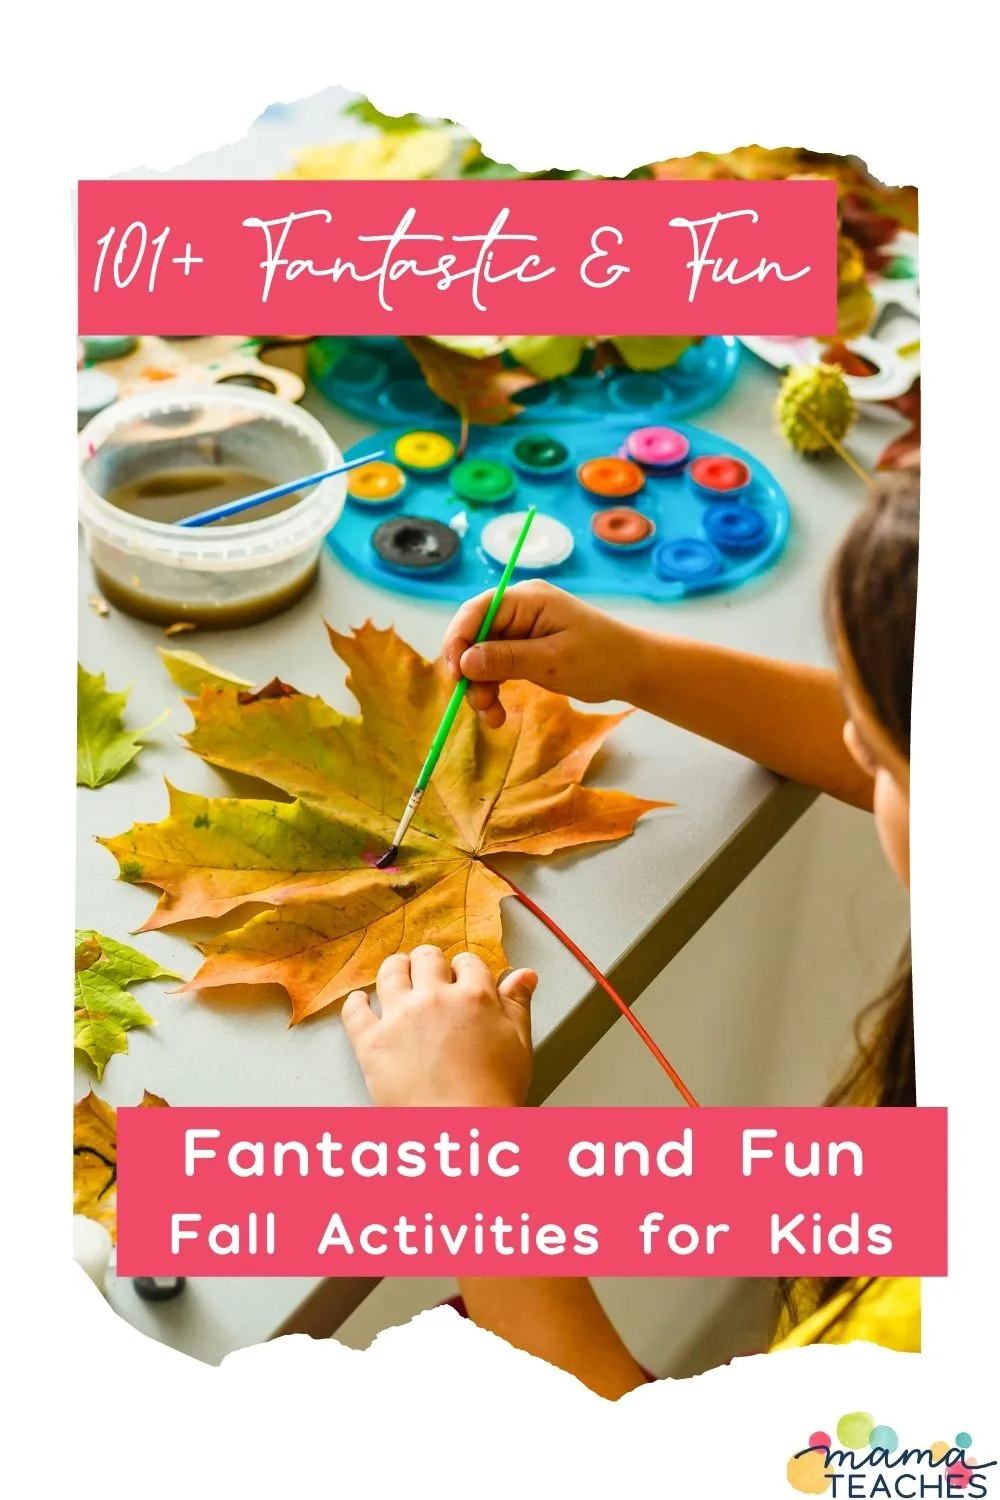 101+ Fantastic and Fun Fall Activities for Kids